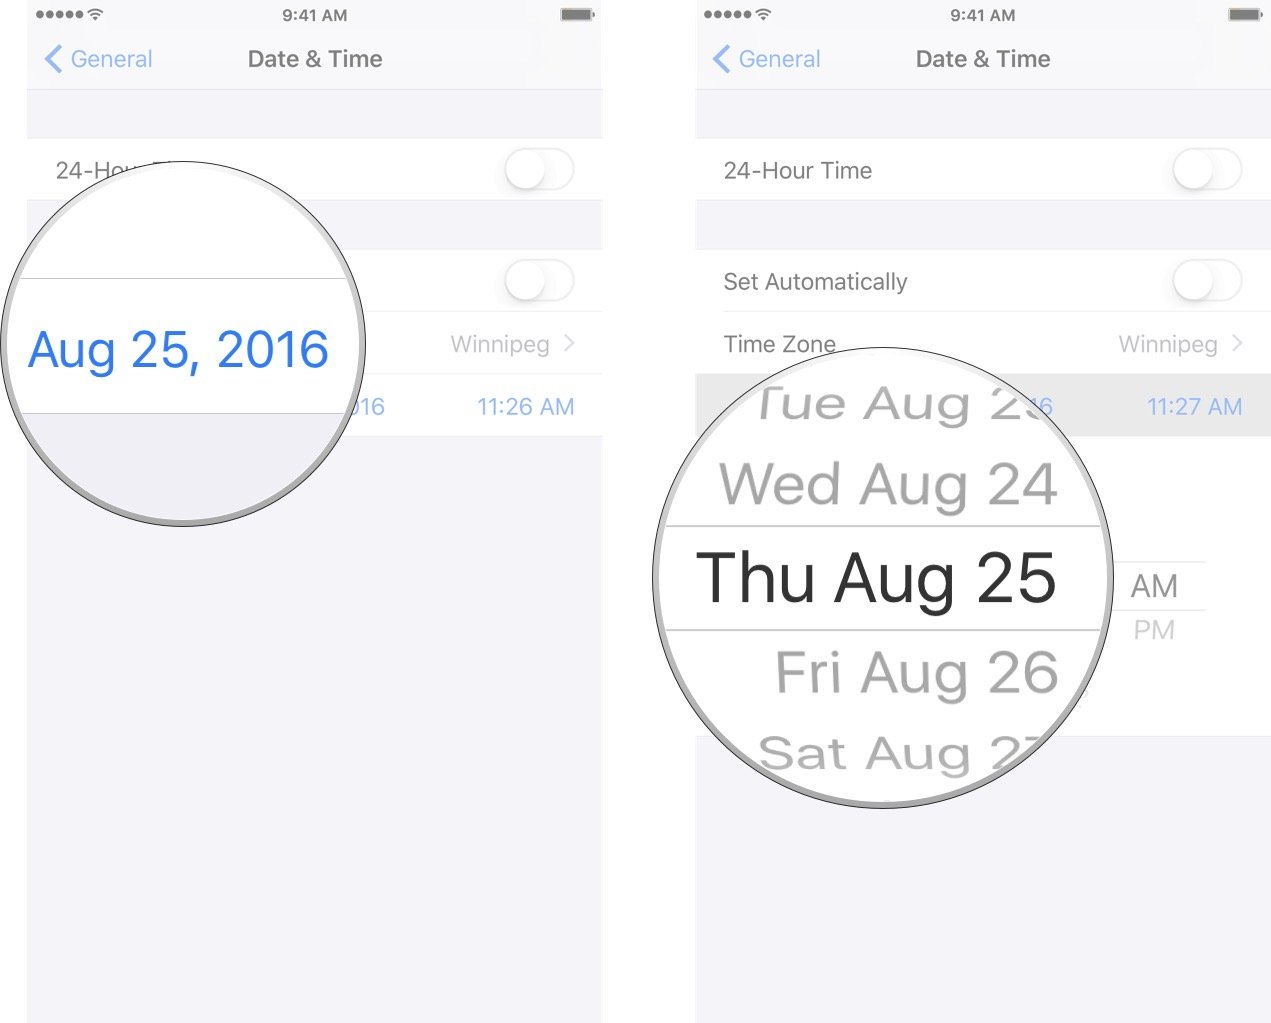 Tap on the date, and then adjust the picker to display the date and time you wish.